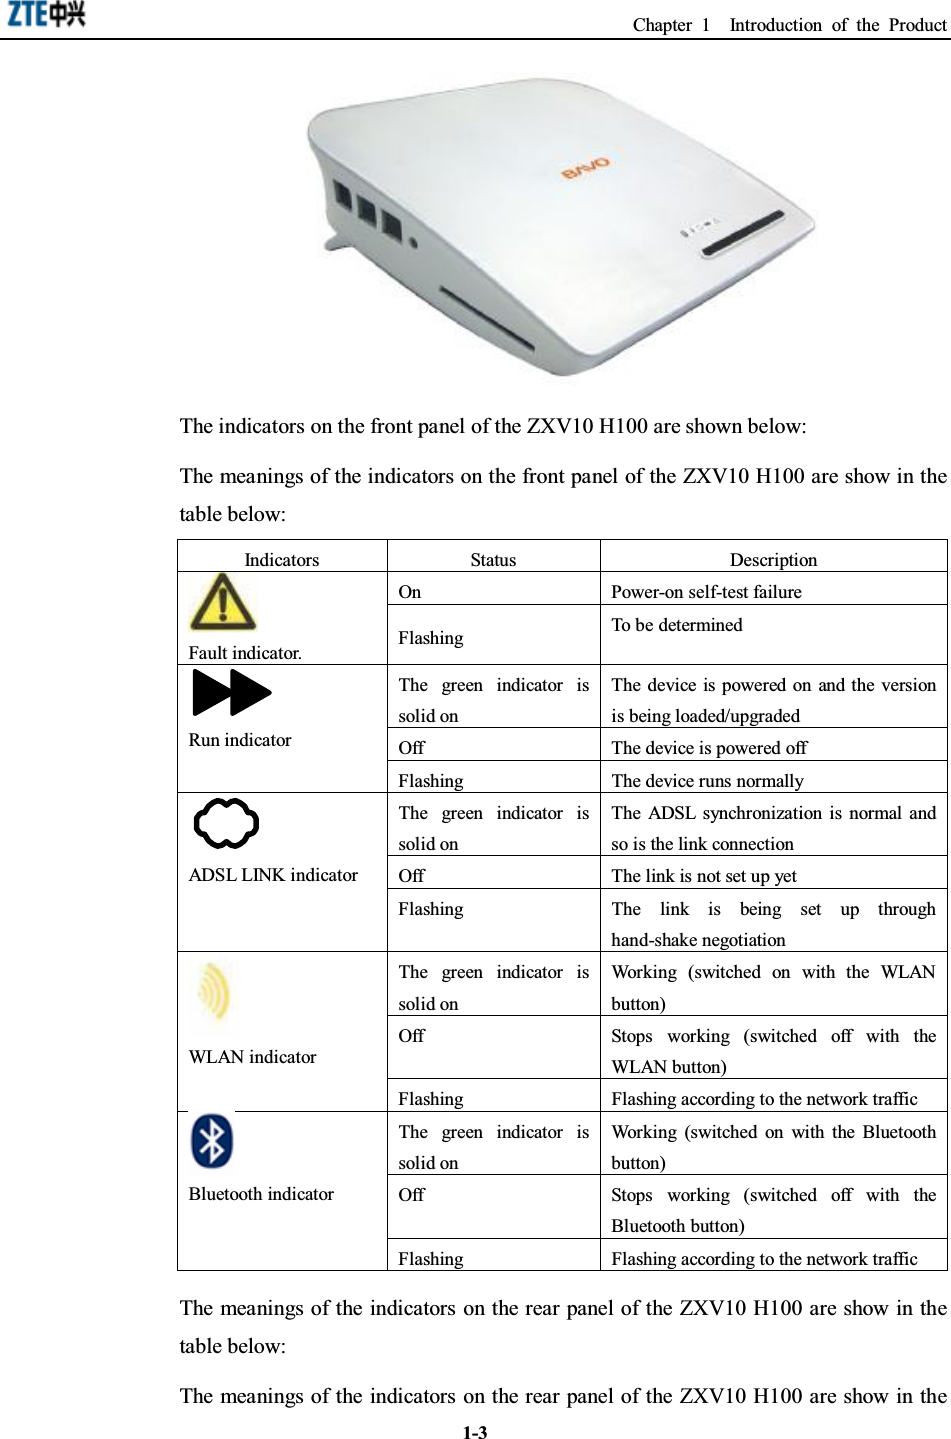 Chapter 1 Introduction of the Product1-3The indicators on the front panel of the ZXV10 H100 are shown below:The meanings of the indicators on the front panel of the ZXV10 H100 are show in thetable below:Indicators Status DescriptionOn Power-on self-test failureFault indicator. Flashing To be determinedThe green indicator issolid onThe device is powered on and the versionis being loaded/upgradedOff The device is powered offRun indicatorFlashing The device runs normallyThe green indicator issolid onThe ADSL synchronization is normal andso is the link connectionOff The link is not set up yetADSL LINK indicatorFlashing The link is being set up throughhand-shake negotiationThe green indicator issolid onWorking (switched on with the WLANbutton)Off Stops working (switched off with theWLAN button)WLAN indicatorFlashing Flashing according to the network trafficThe green indicator issolid onWorking (switched on with the Bluetoothbutton)Off Stops working (switched off with theBluetooth button)Bluetooth indicatorFlashing Flashing according to the network trafficThe meanings of the indicators on the rear panel of the ZXV10 H100 are show in thetable below:The meanings of the indicators on the rear panel of the ZXV10 H100 are show in the